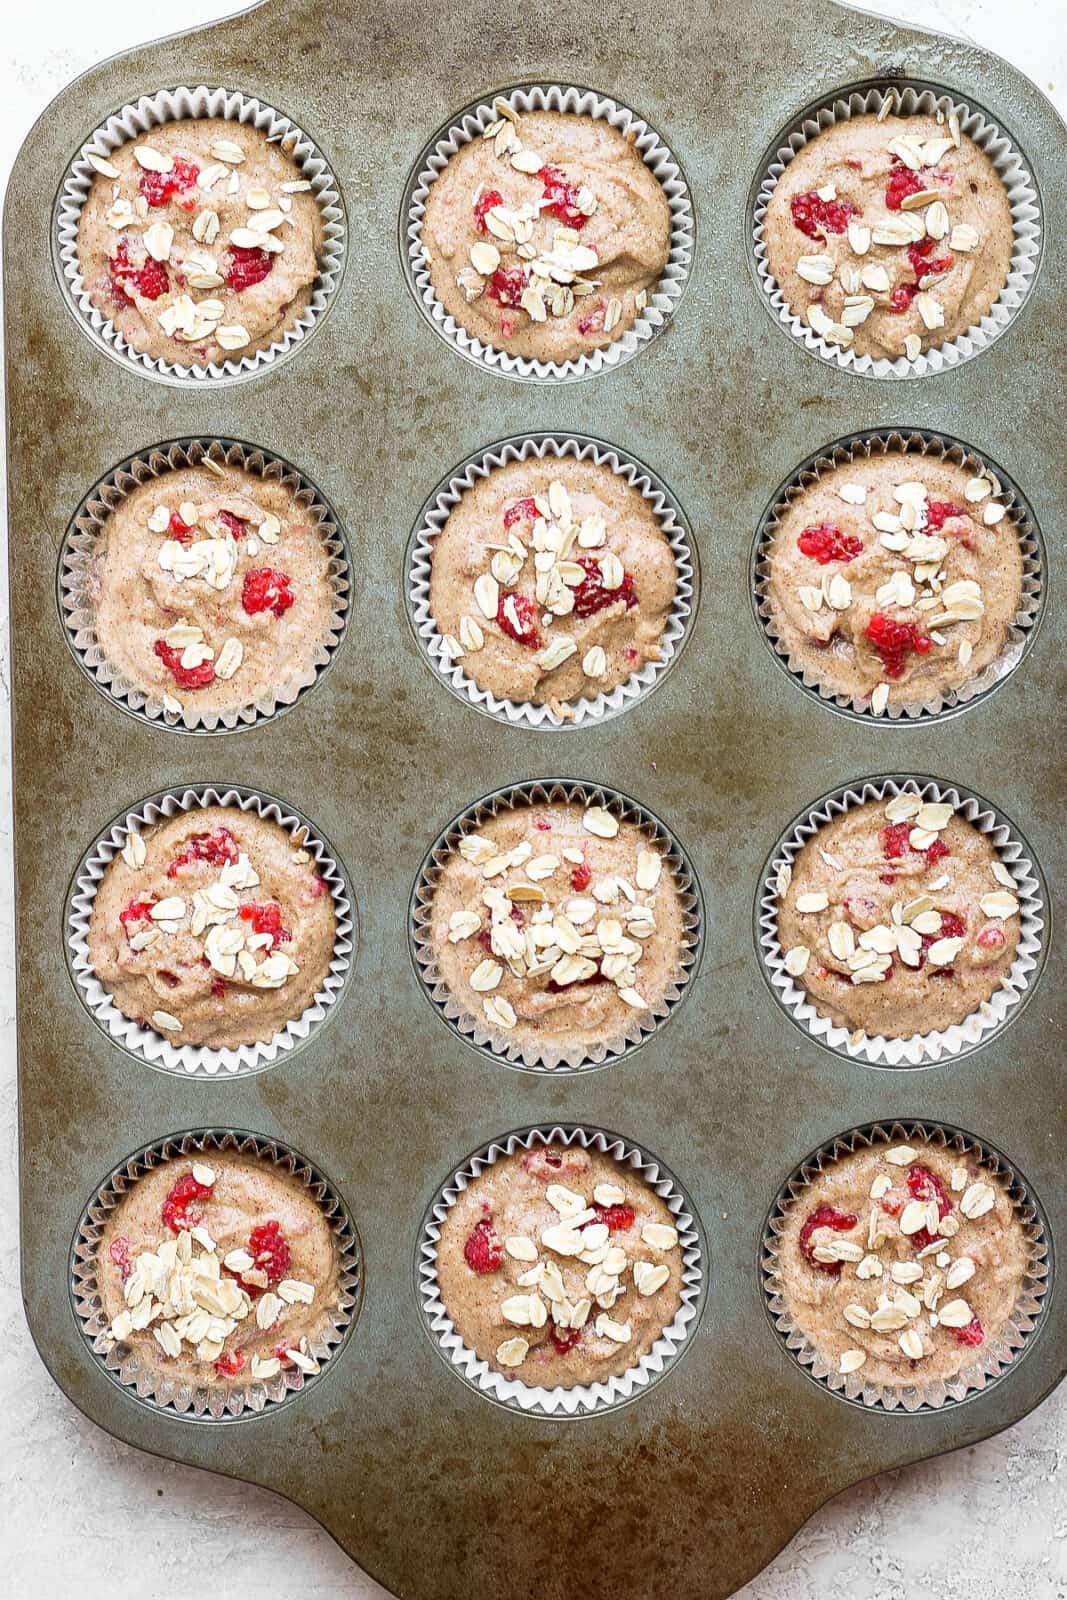 Raspberry muffins in a muffin tin before baking.